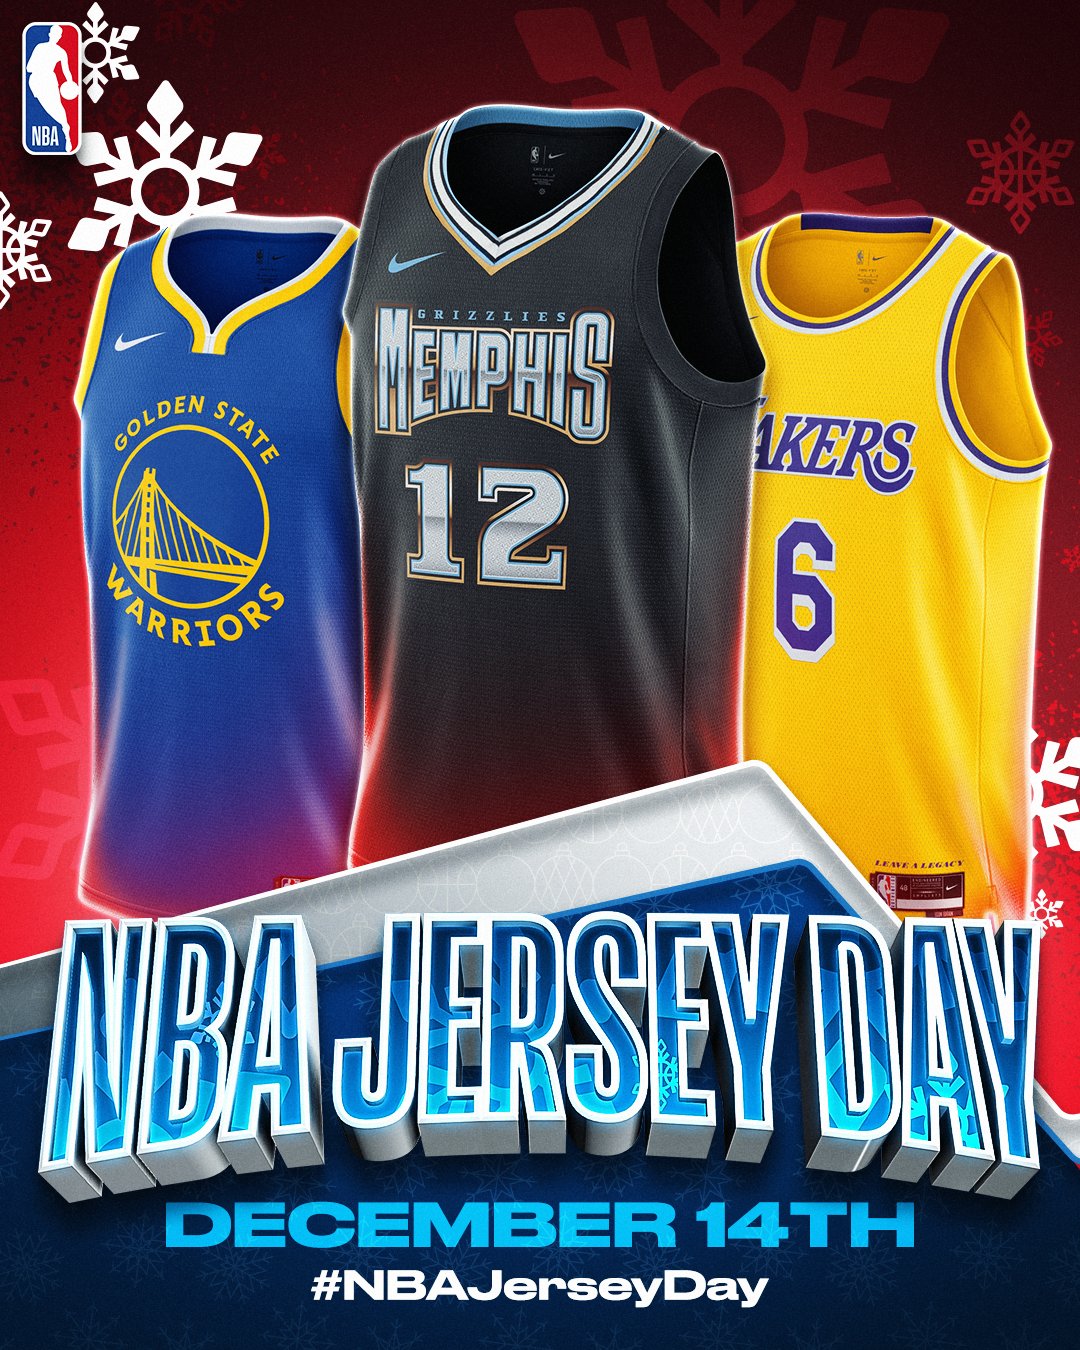 NBA Jersey Day returns for its third year on Dec. 14